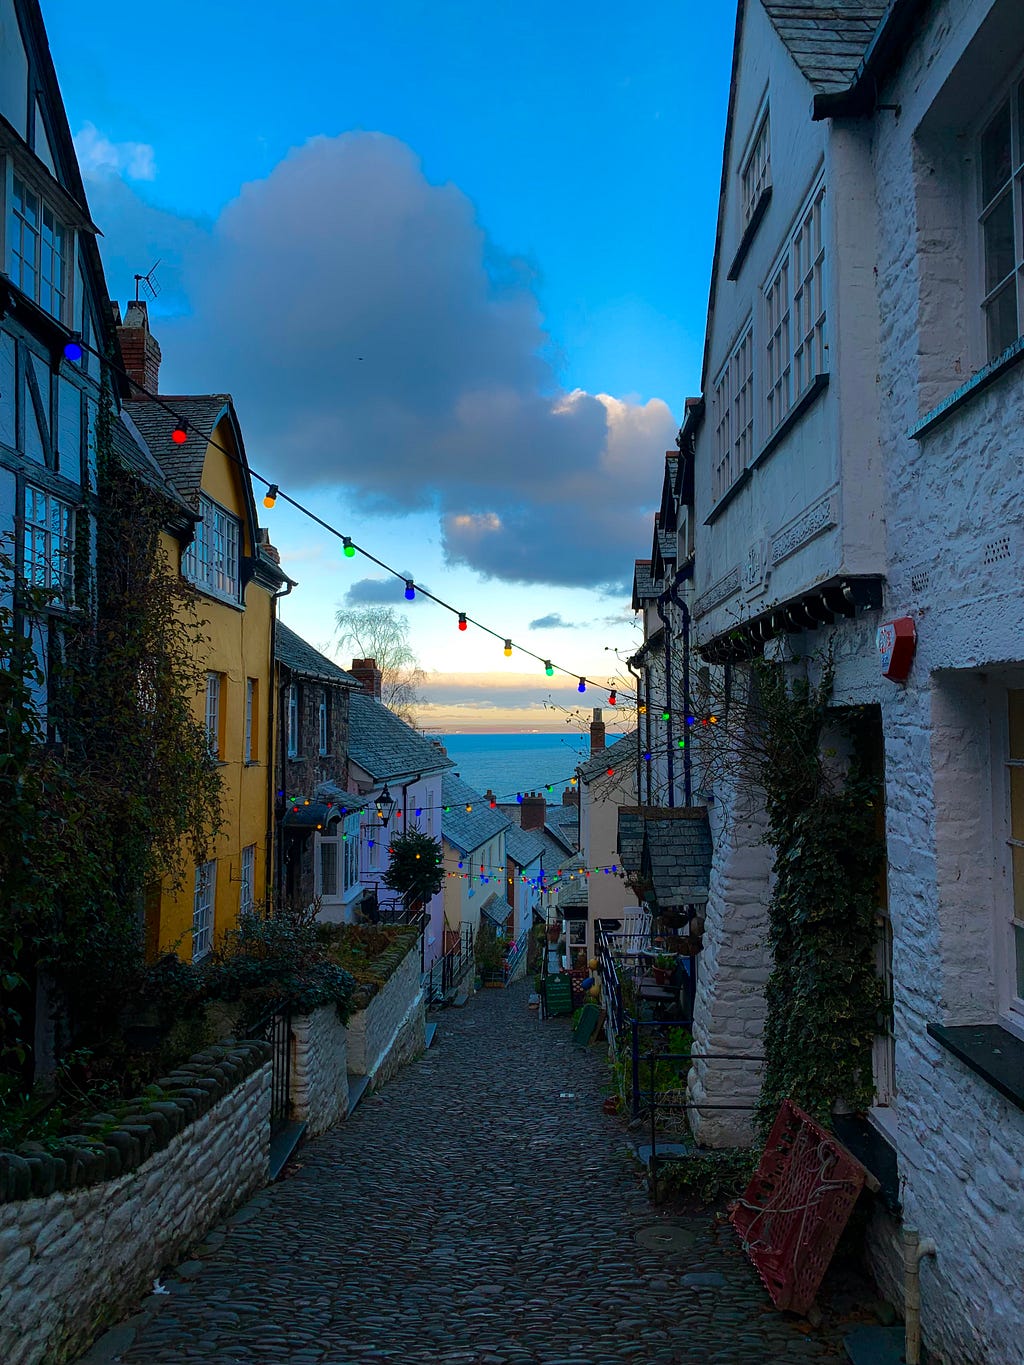 View of a picturesque street in Clovelly, Devon.